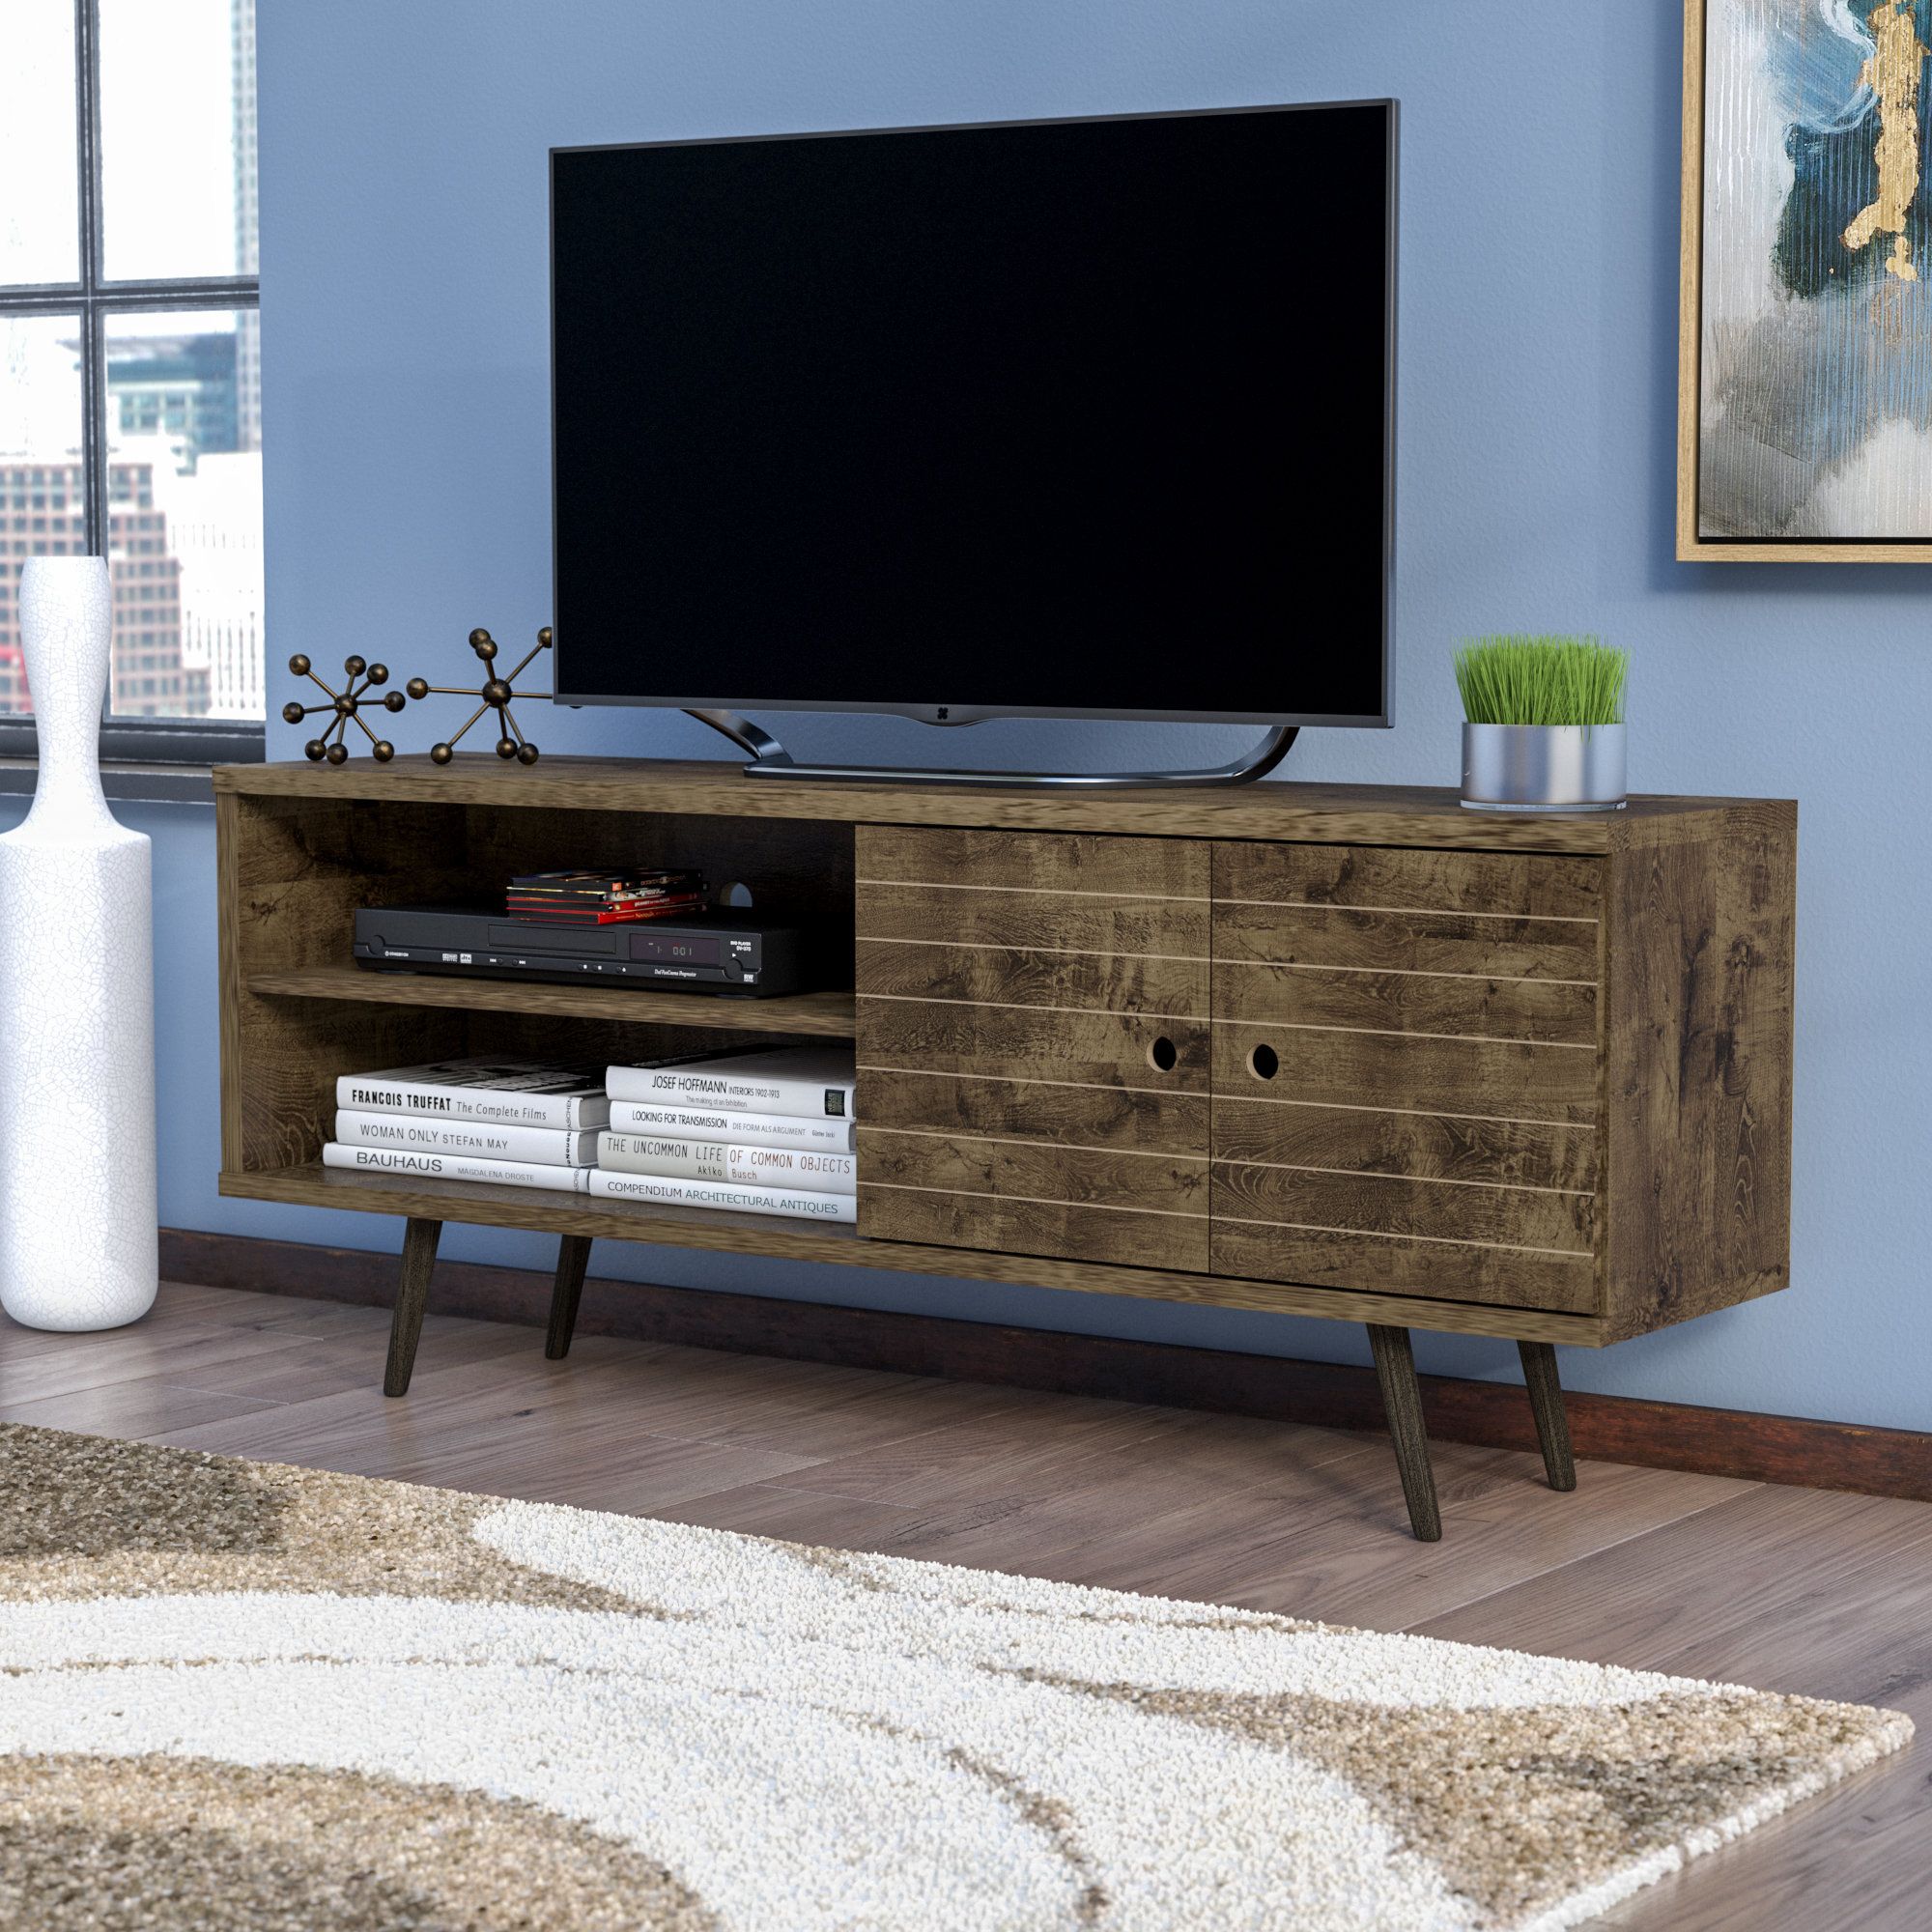 Mistana Hal Tv Stand For Tvs Up To 60" & Reviews | Wayfair Intended For Century Blue 60 Inch Tv Stands (View 7 of 30)